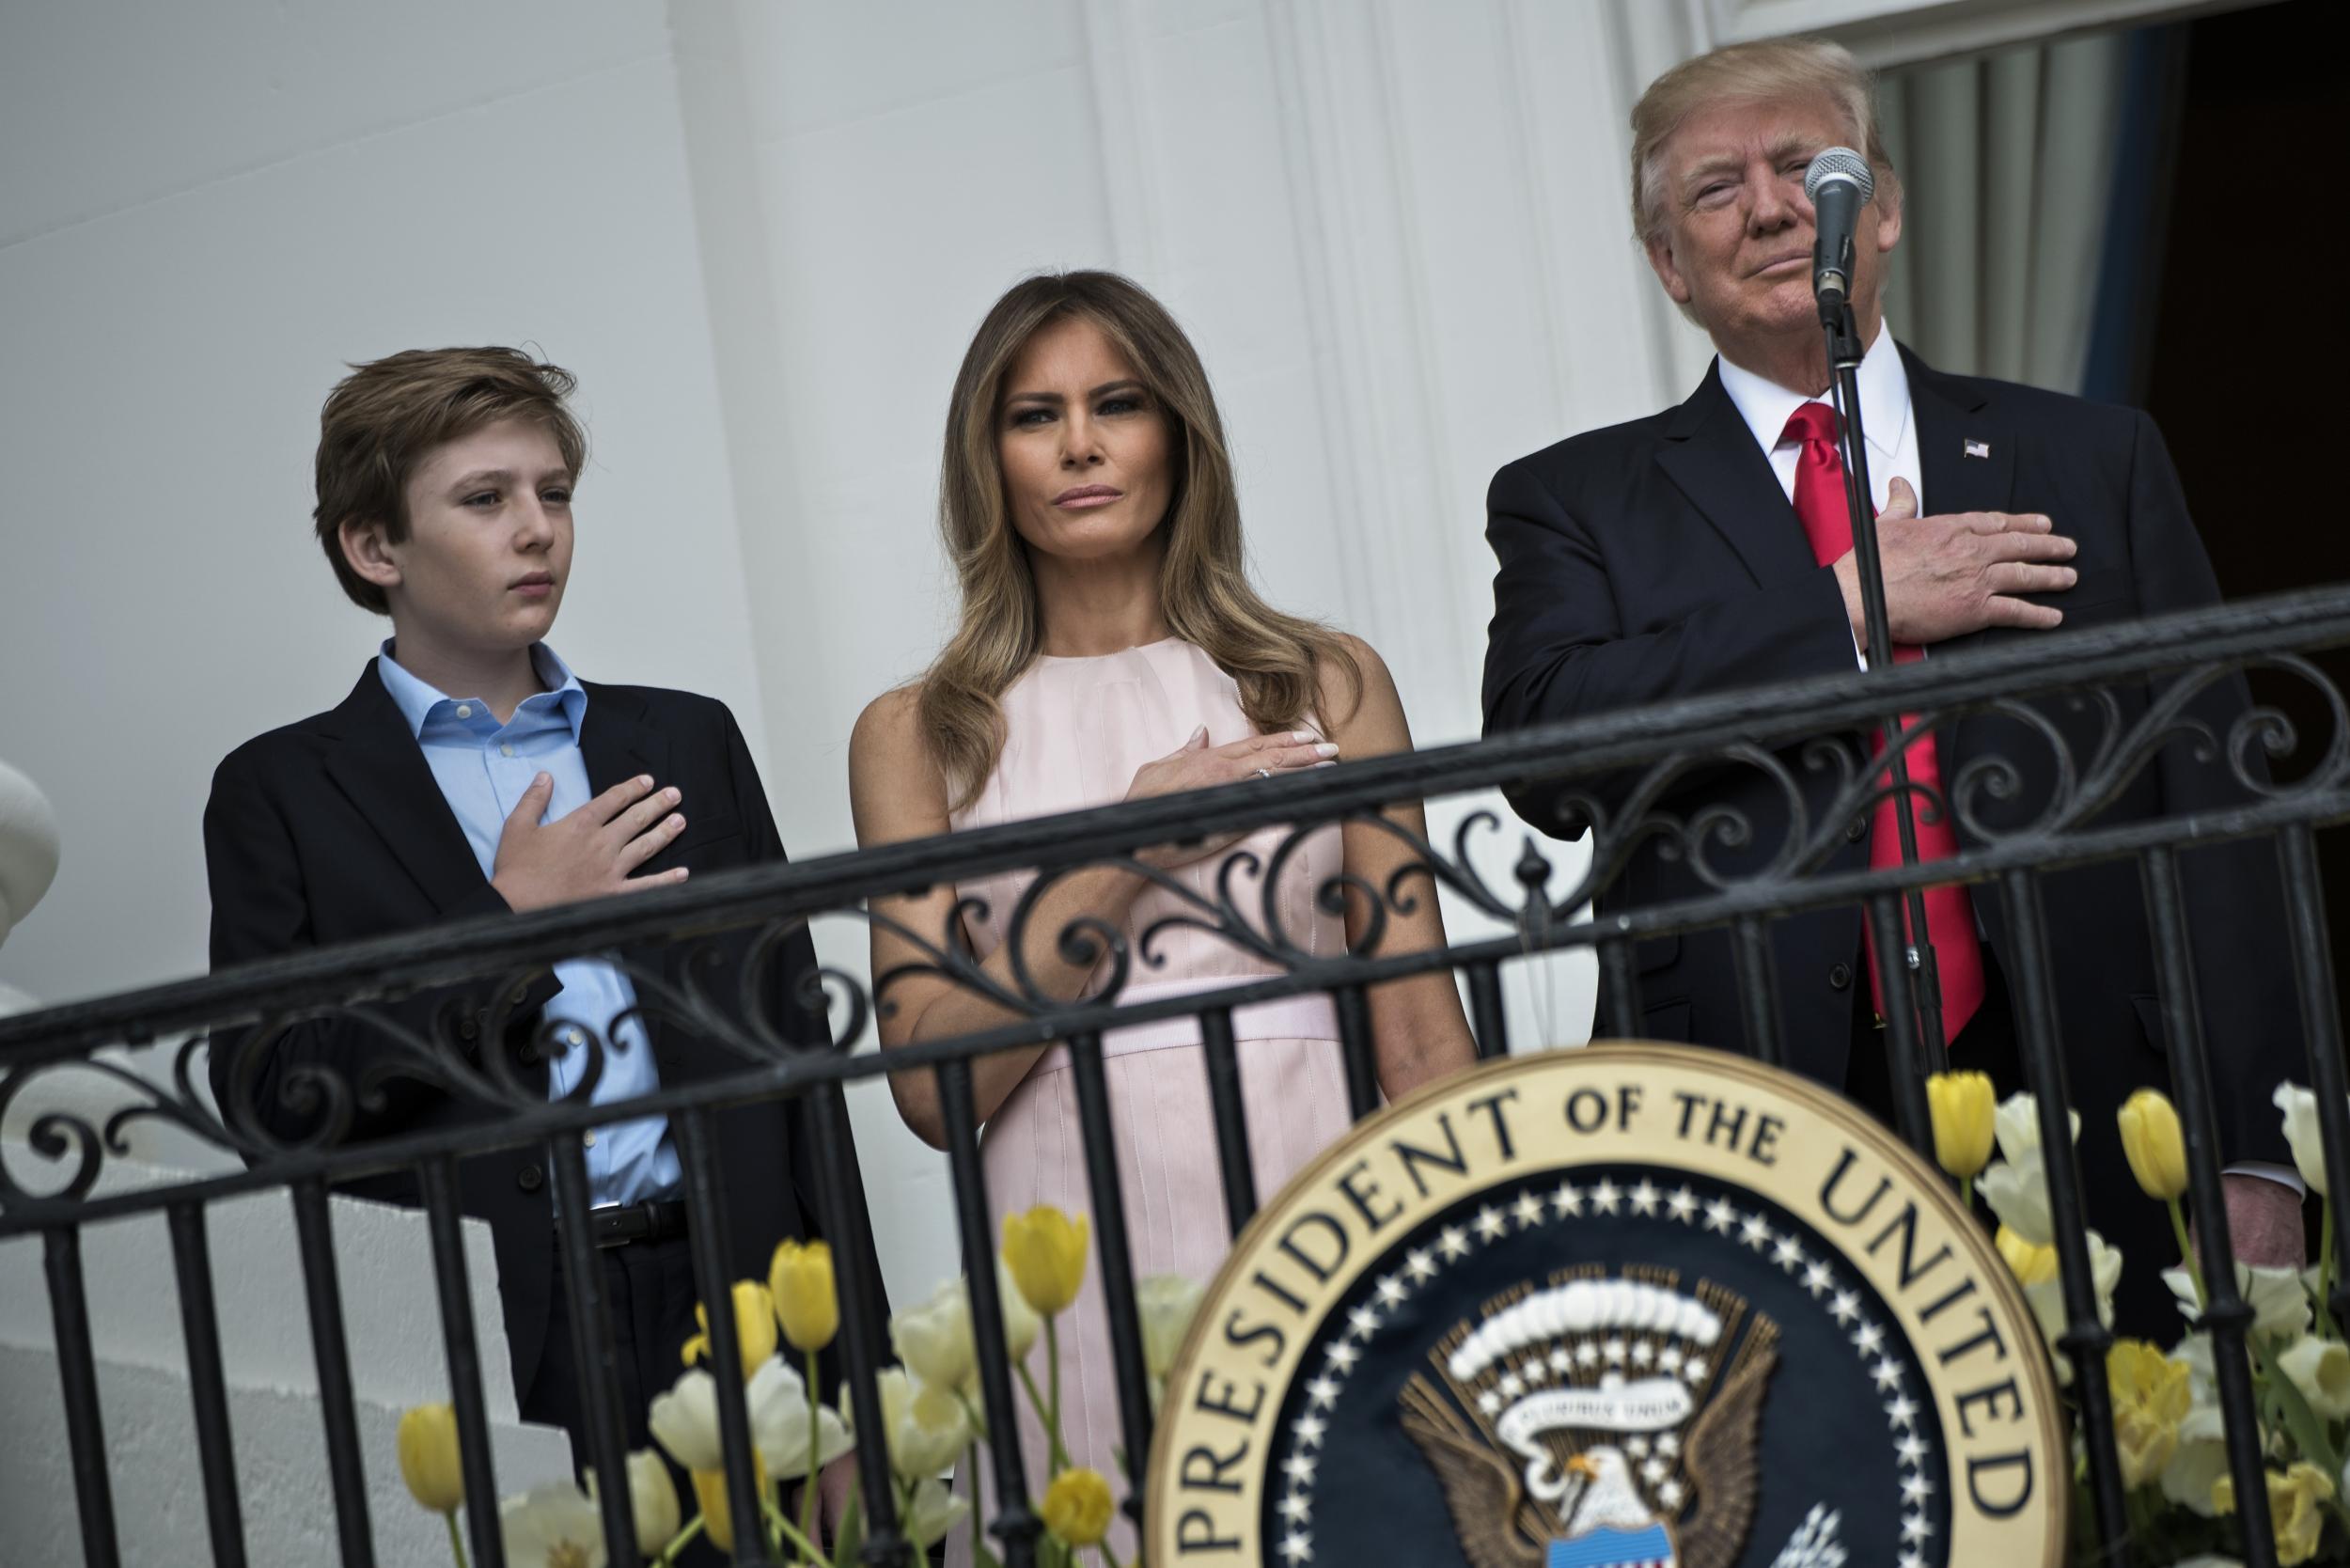 First Lady Melania Trump had to nudge Donald Trump to put his hand on his heart at the start of the national anthem during the annual White House Easter egg roll